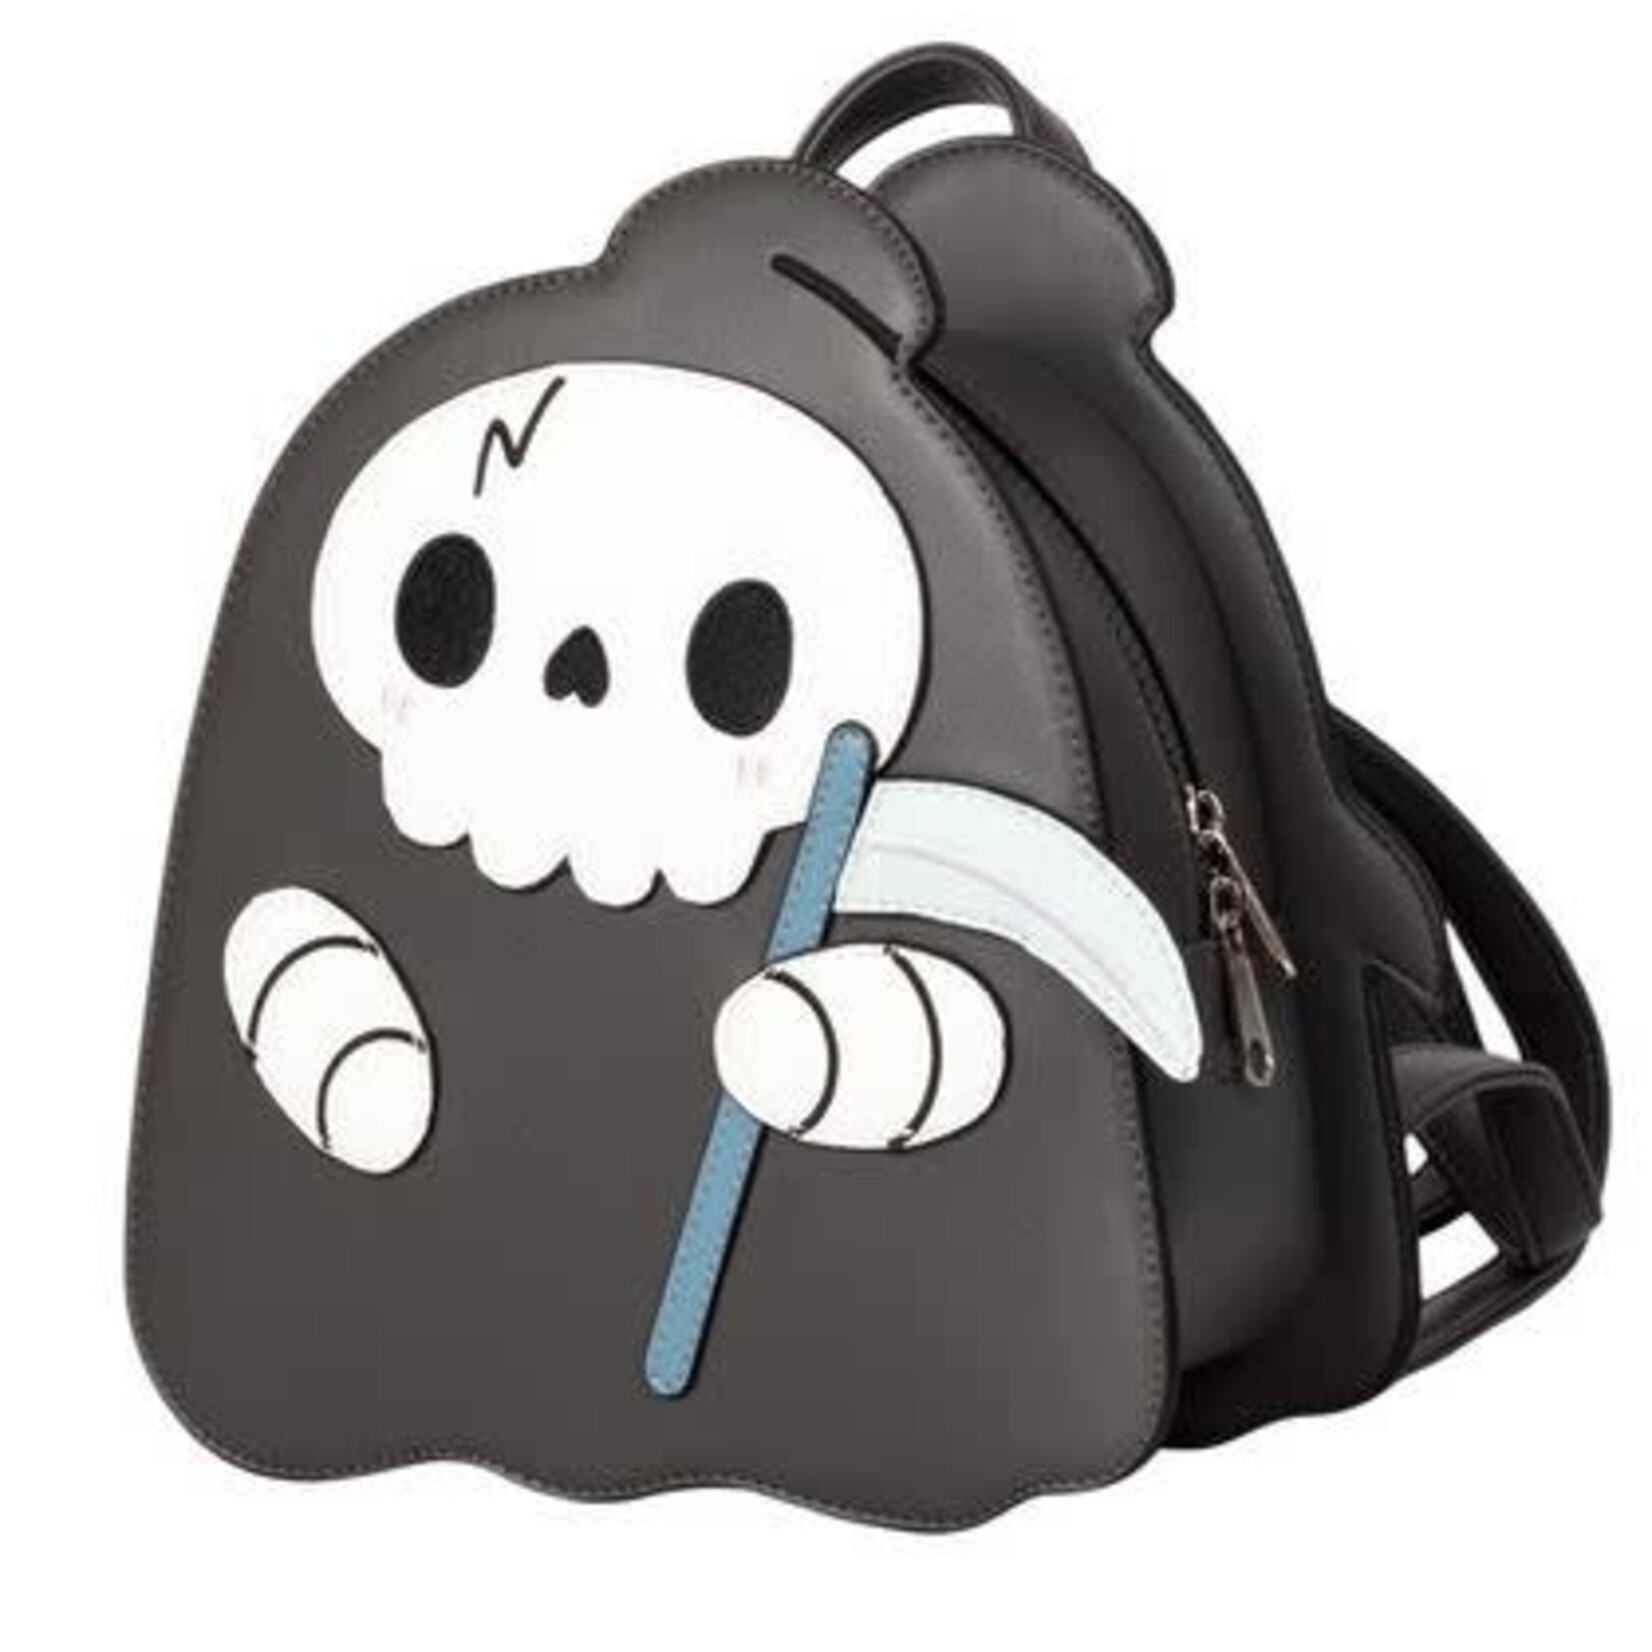 Squishable Backpack: Reaper